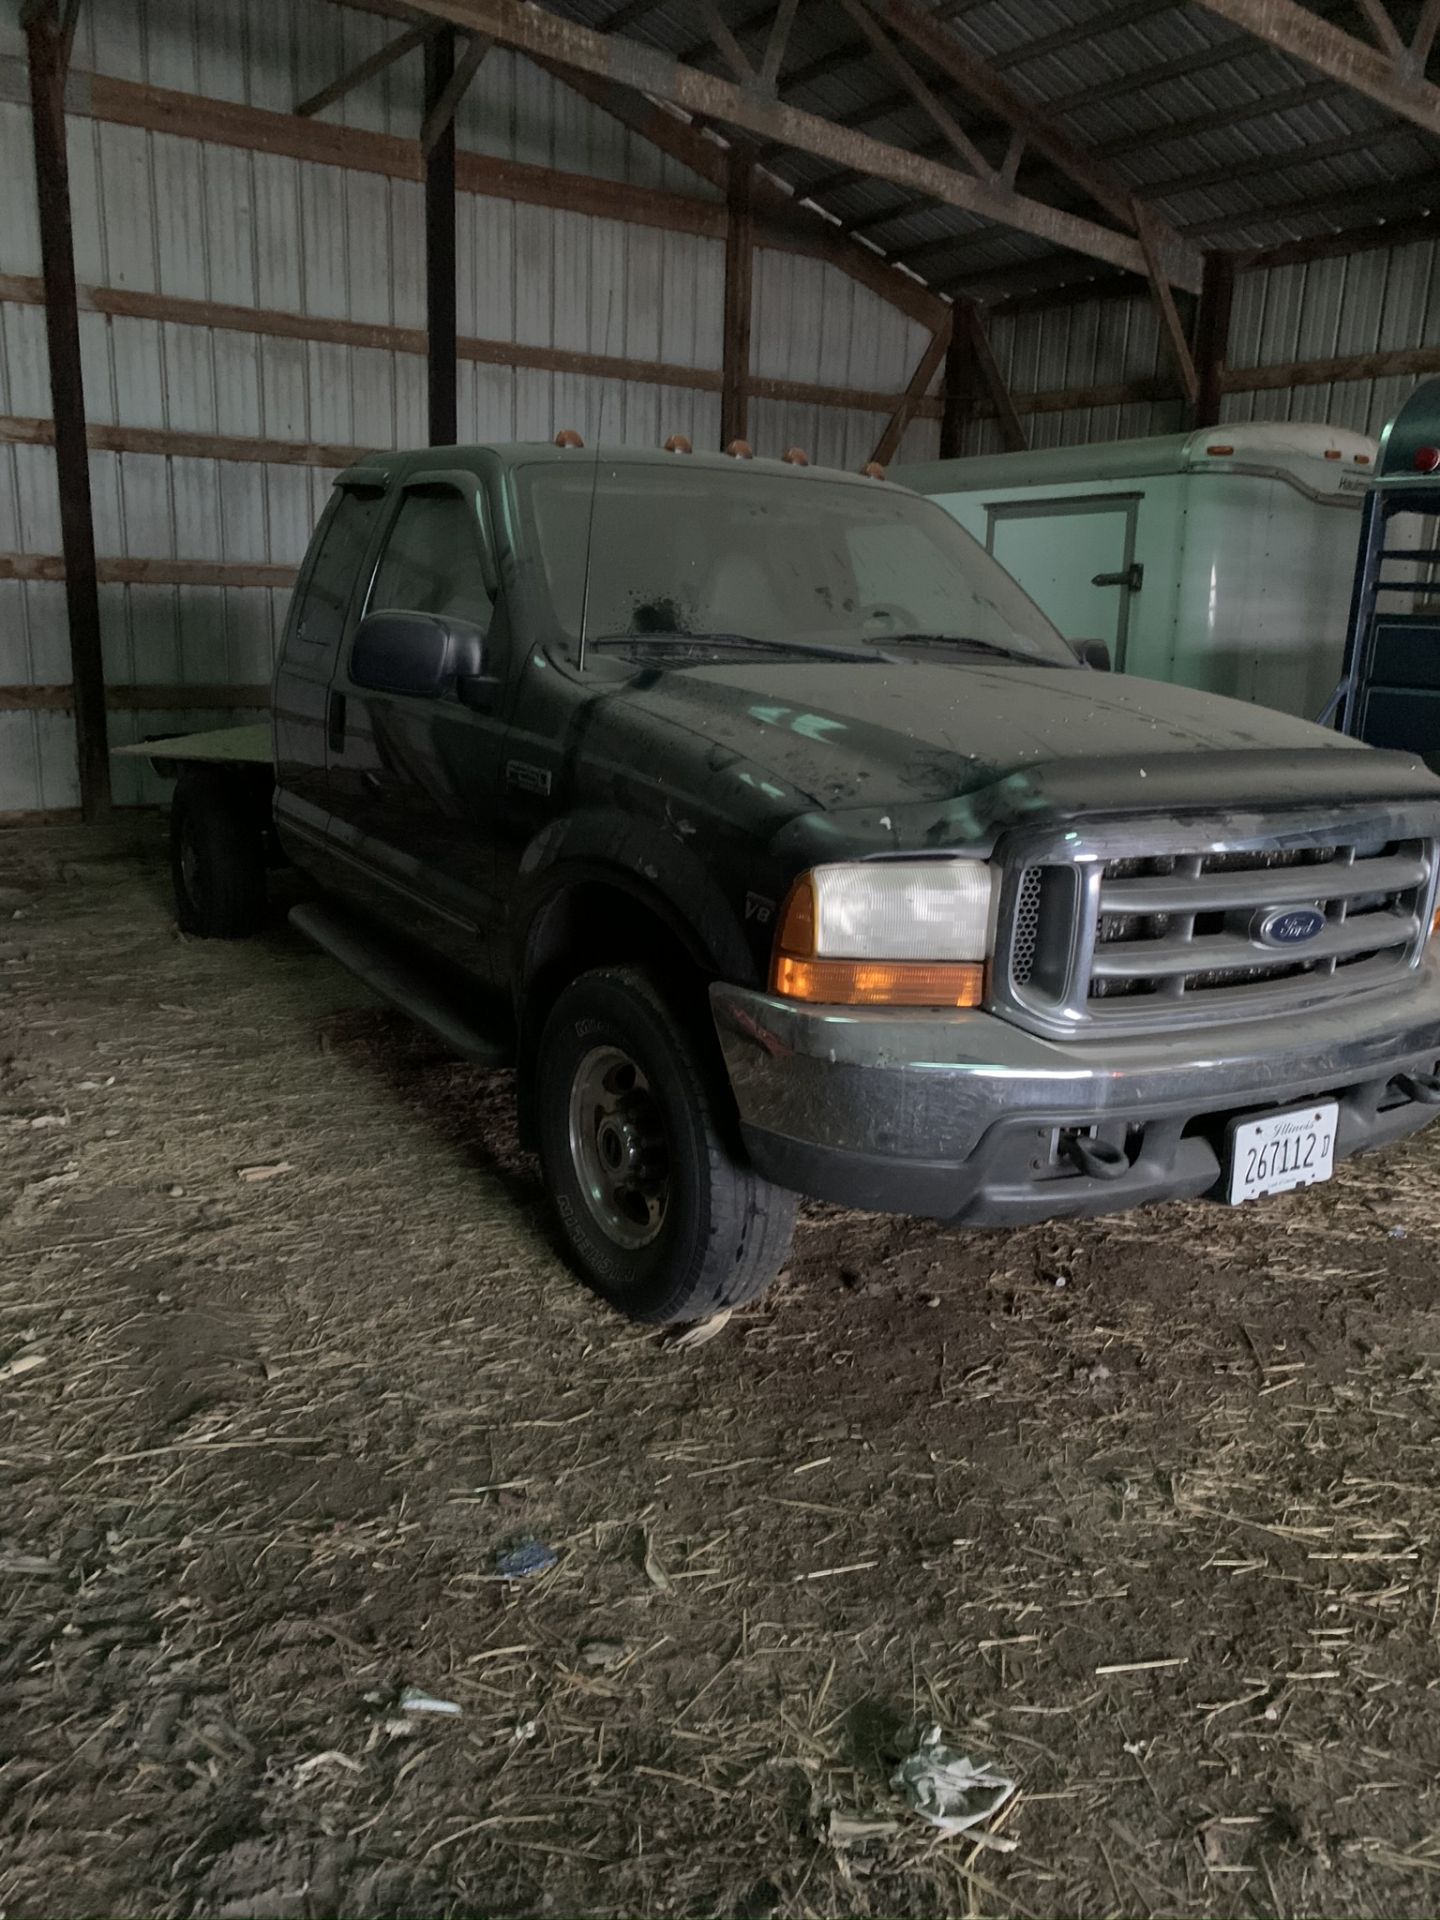 1999 Ford F-250 Lariat Extended Cab, 7.3 Power Stroke Diesel, 4x4, Cab&Chasis, Vin 1FTNX21FOXEB72445 - Image 7 of 13